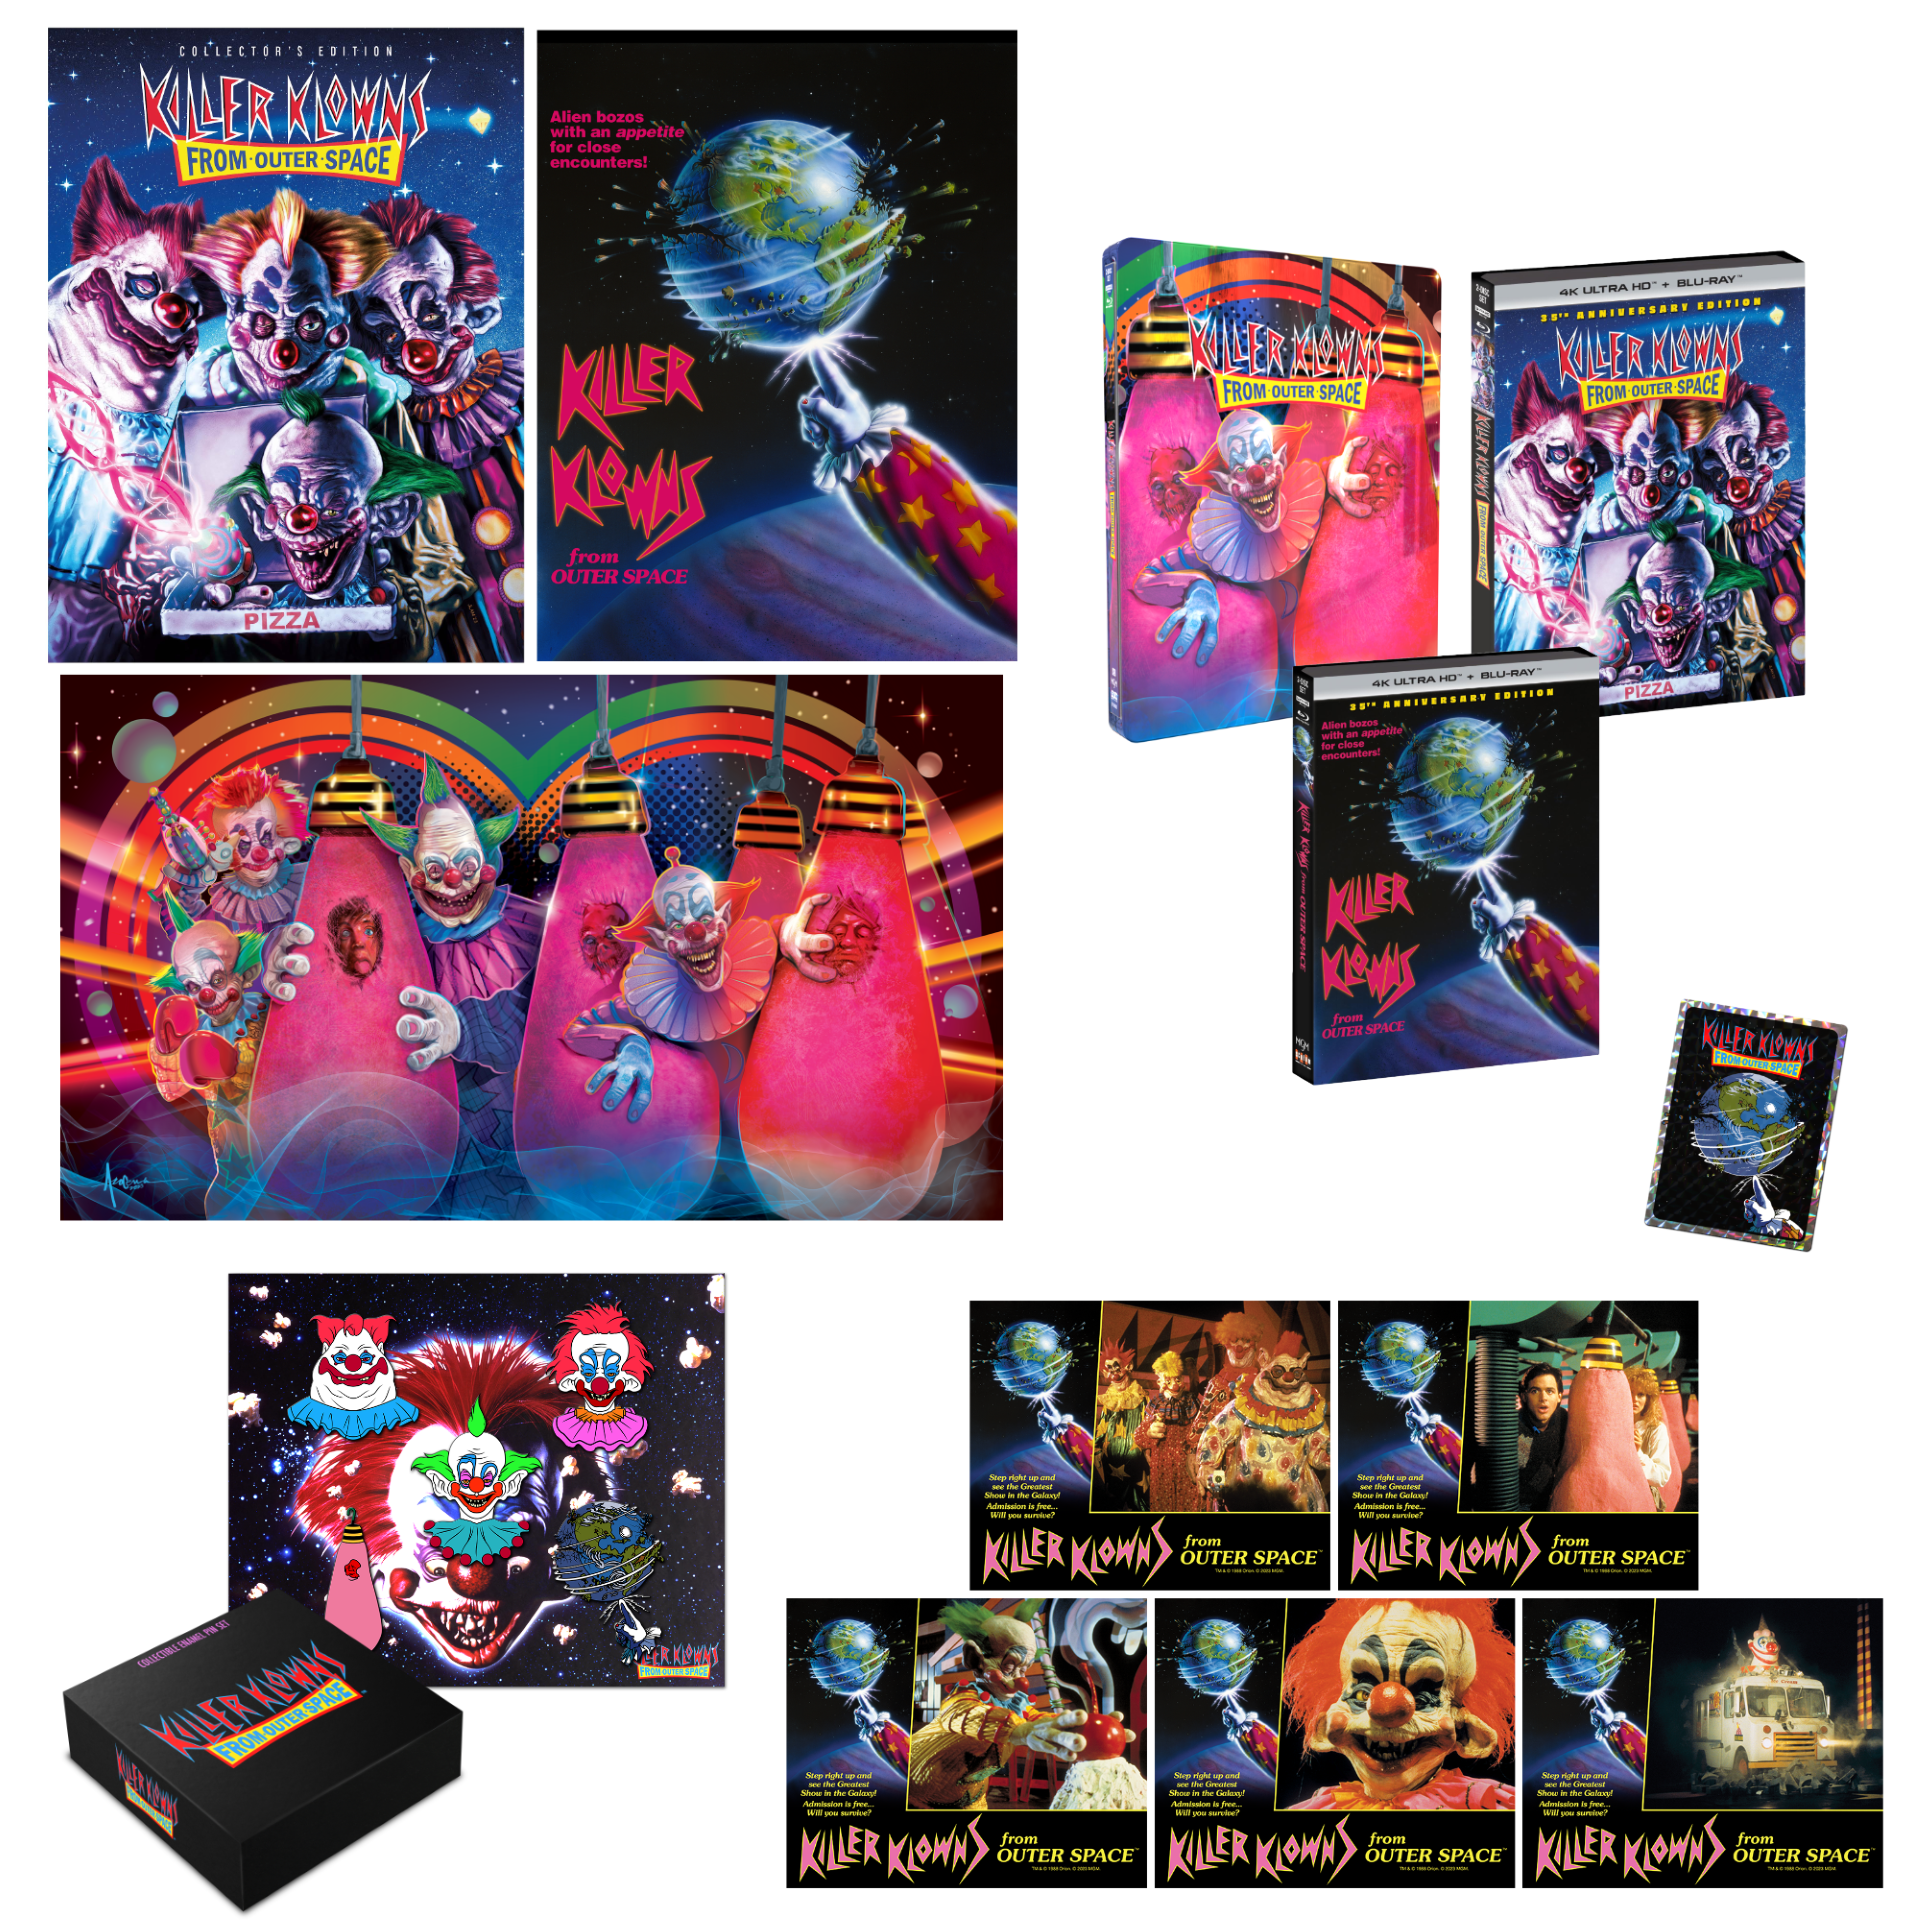 Killer Klowns From Outer Space [35th Anniversary Edition] + [Limited 35th Anniversary Steelbook] + Exclusive Slipcover + 3 Exclusive Posters + Prism Sticker + Enamel Pins + Lobby Cards - Shout! Factory